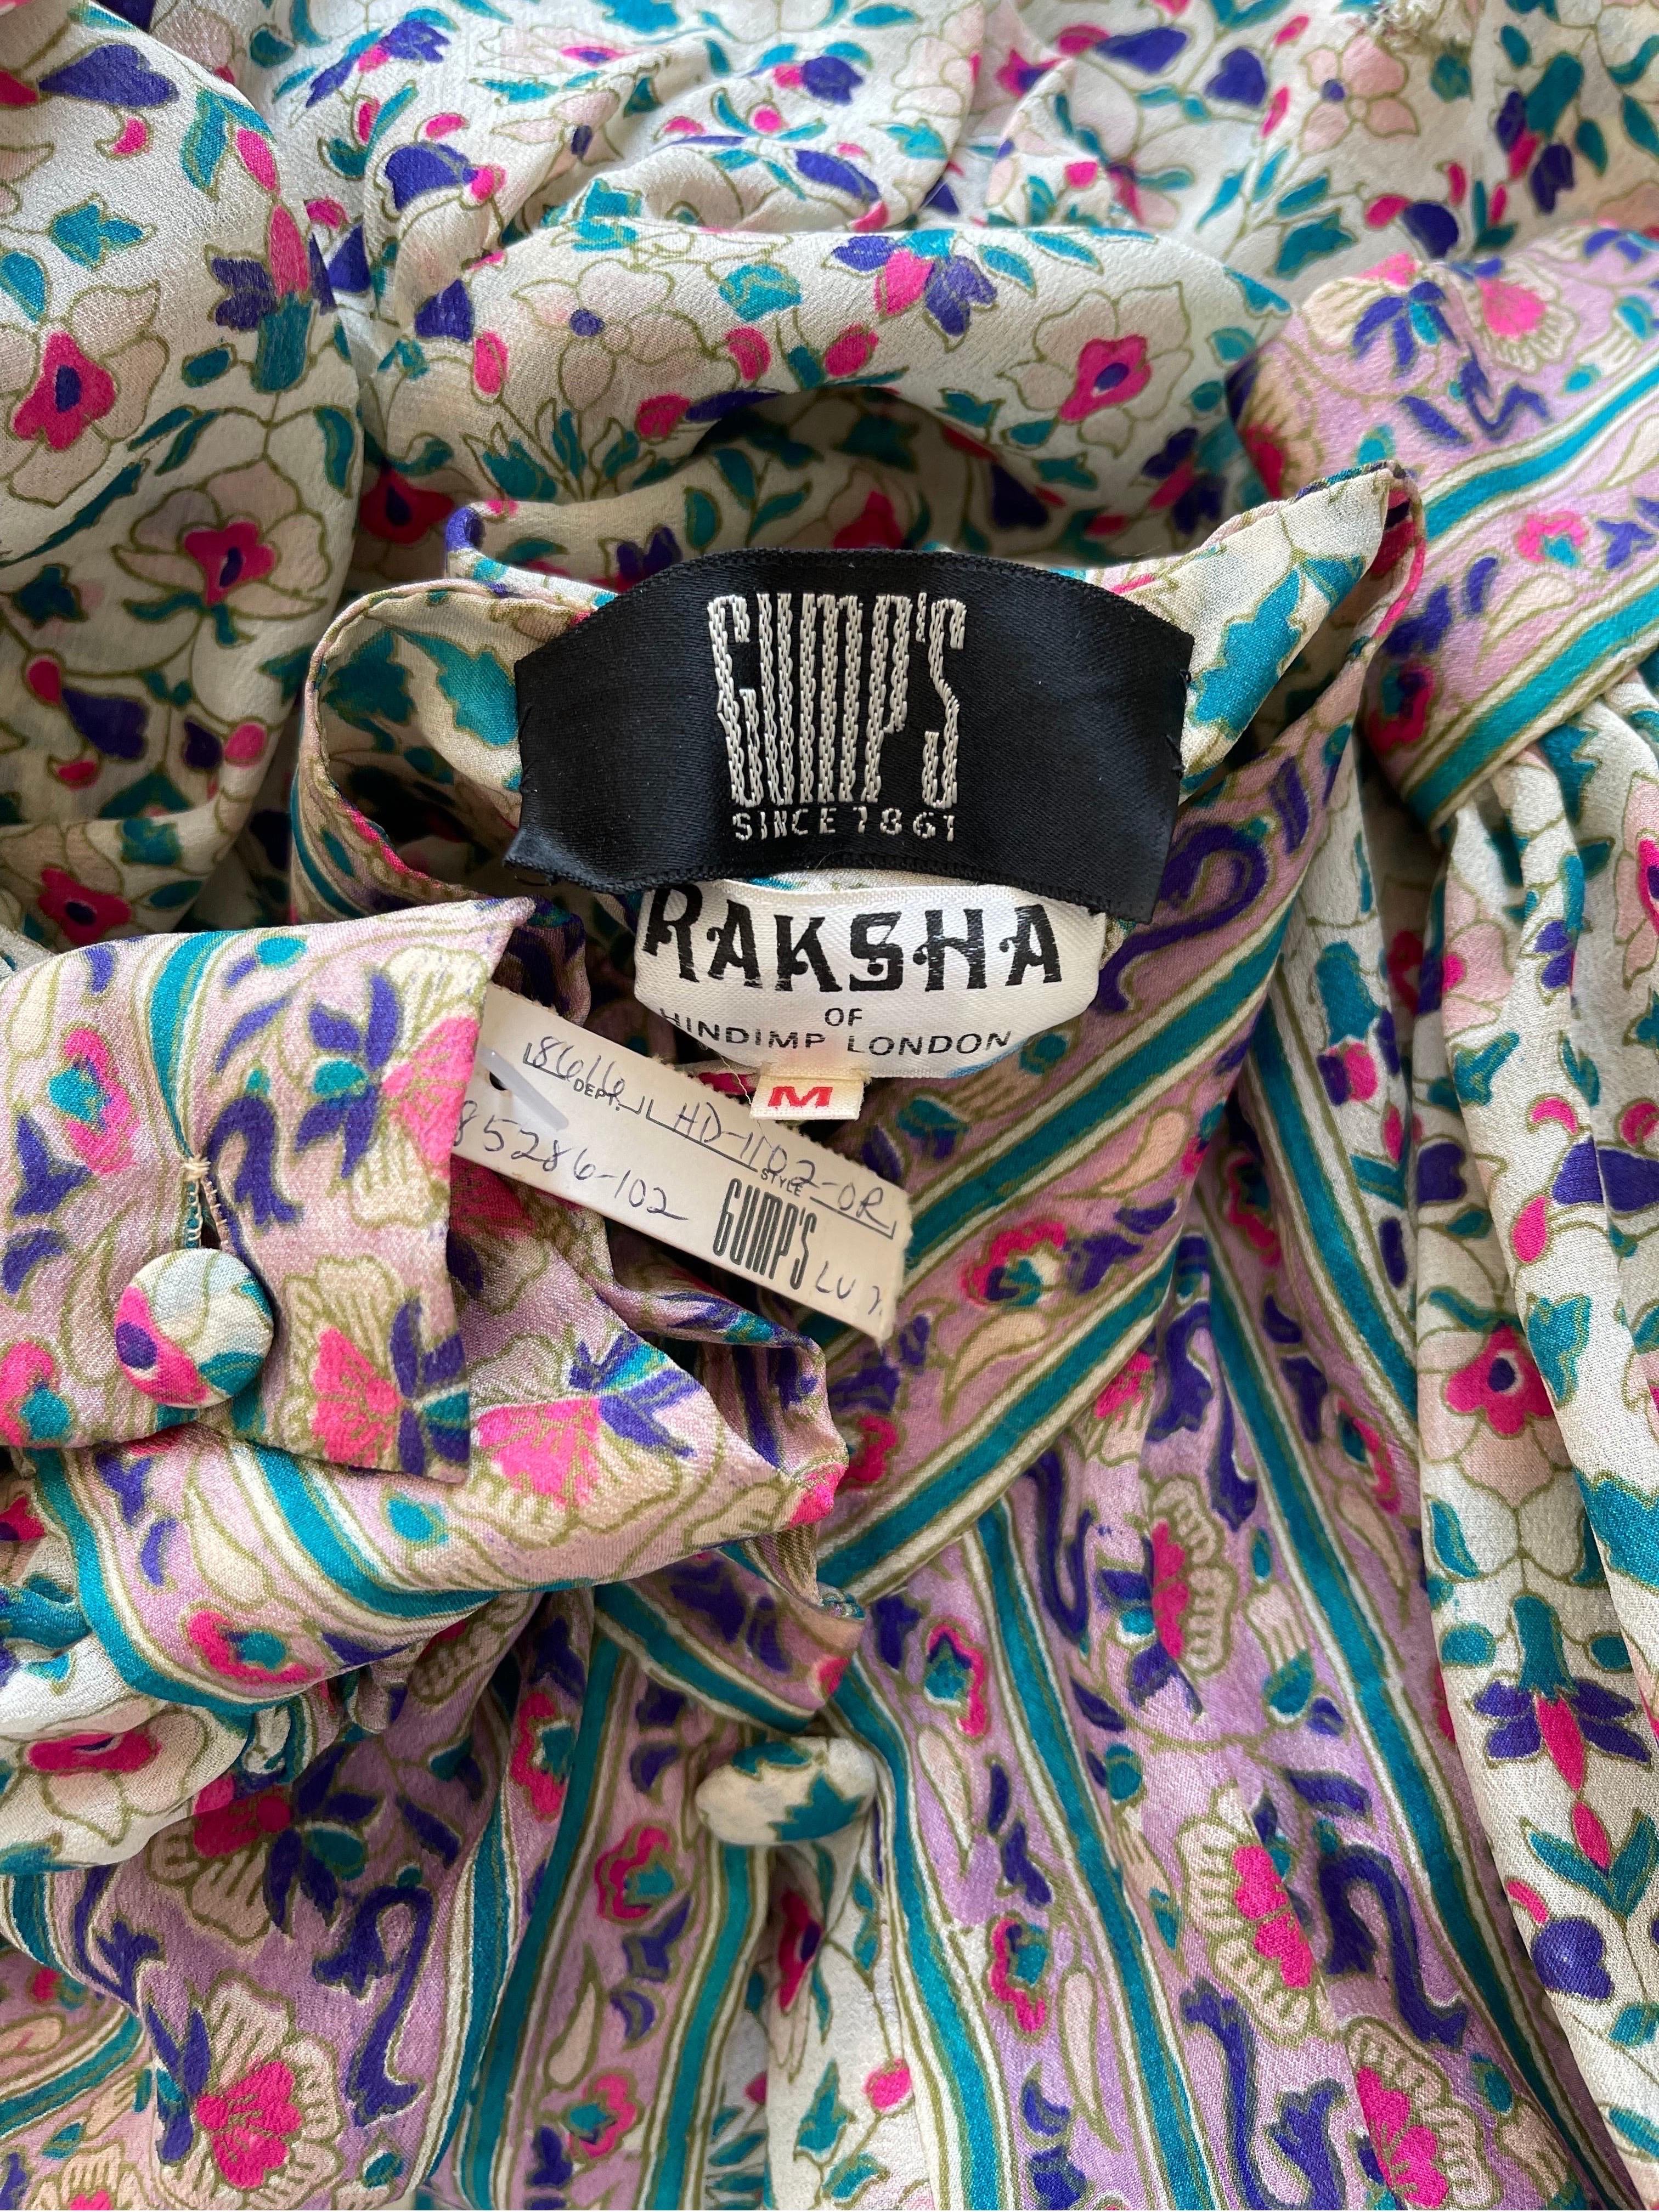 Rare, beautiful and brand new with original store tags vintage 70s RAKSHA OF HINDIMP LONDON silk chiffon flower and paisley print boho maxi dress or duster jacket ! Vibrant colors of pink, green, purple and ivory throughout. Features the most